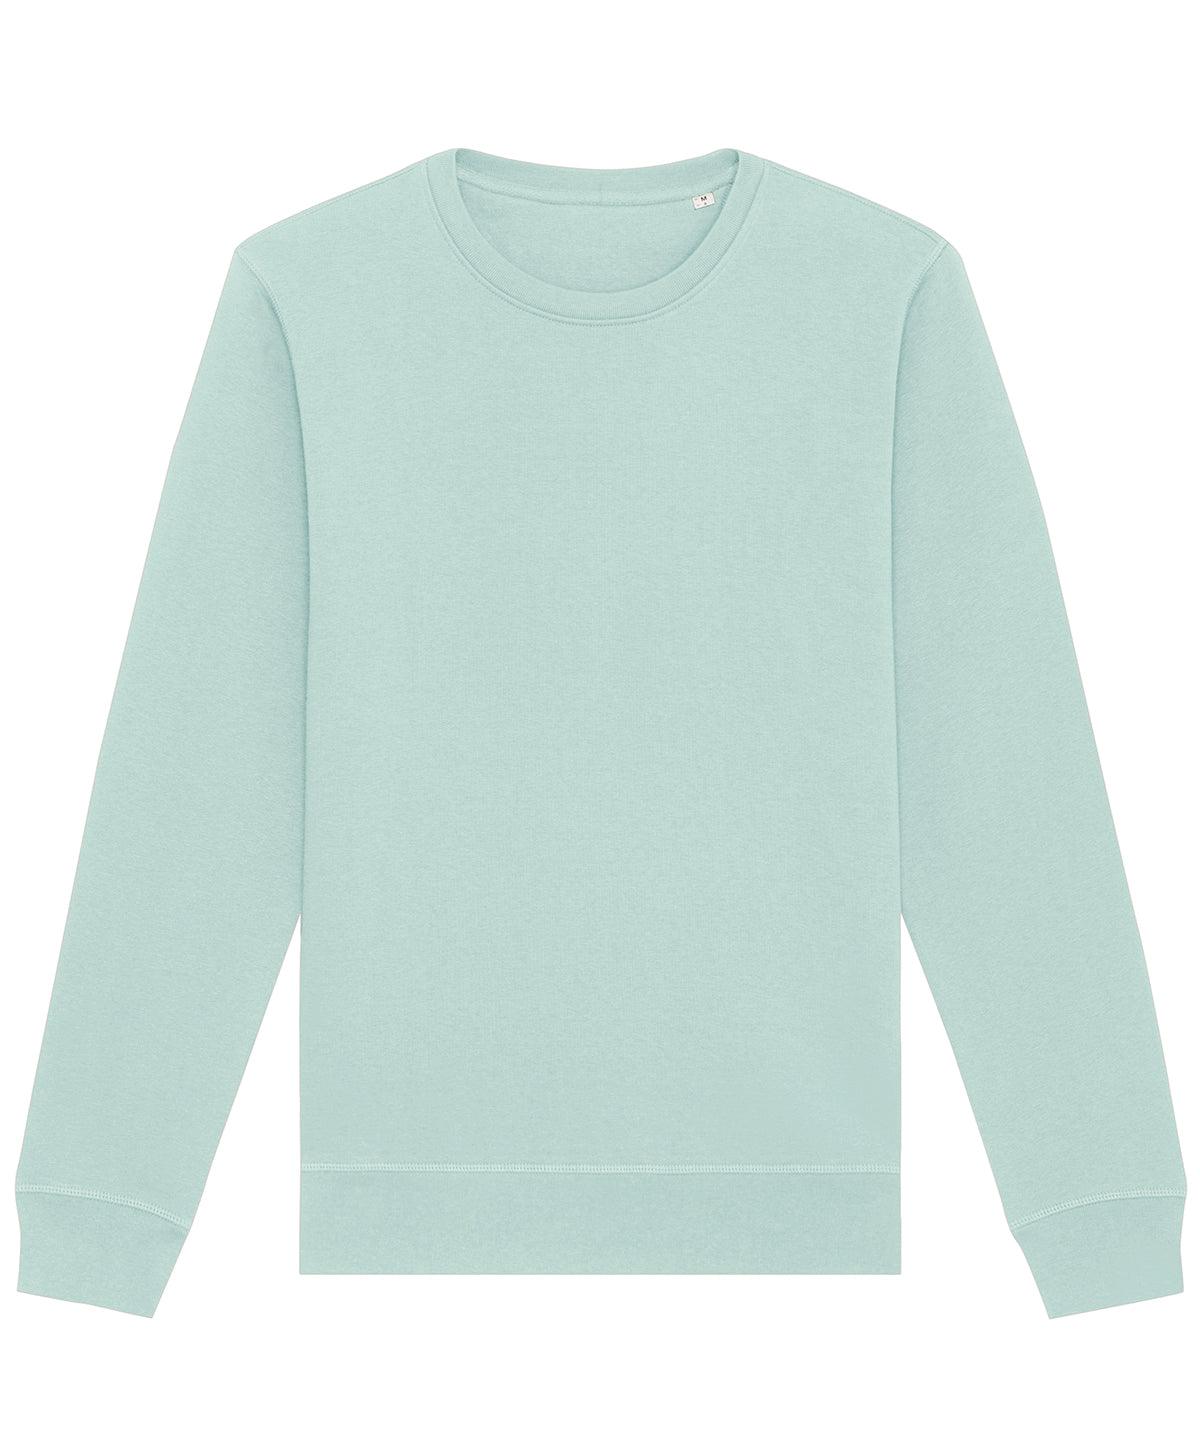 Caribbean Blue - Roller unisex crew neck sweatshirt (STSU868) Sweatshirts Stanley/Stella Exclusives, New Colours For 2022, New For 2021, New In Autumn Winter, New In Mid Year, Organic & Conscious, Stanley/ Stella, Sweatshirts Schoolwear Centres